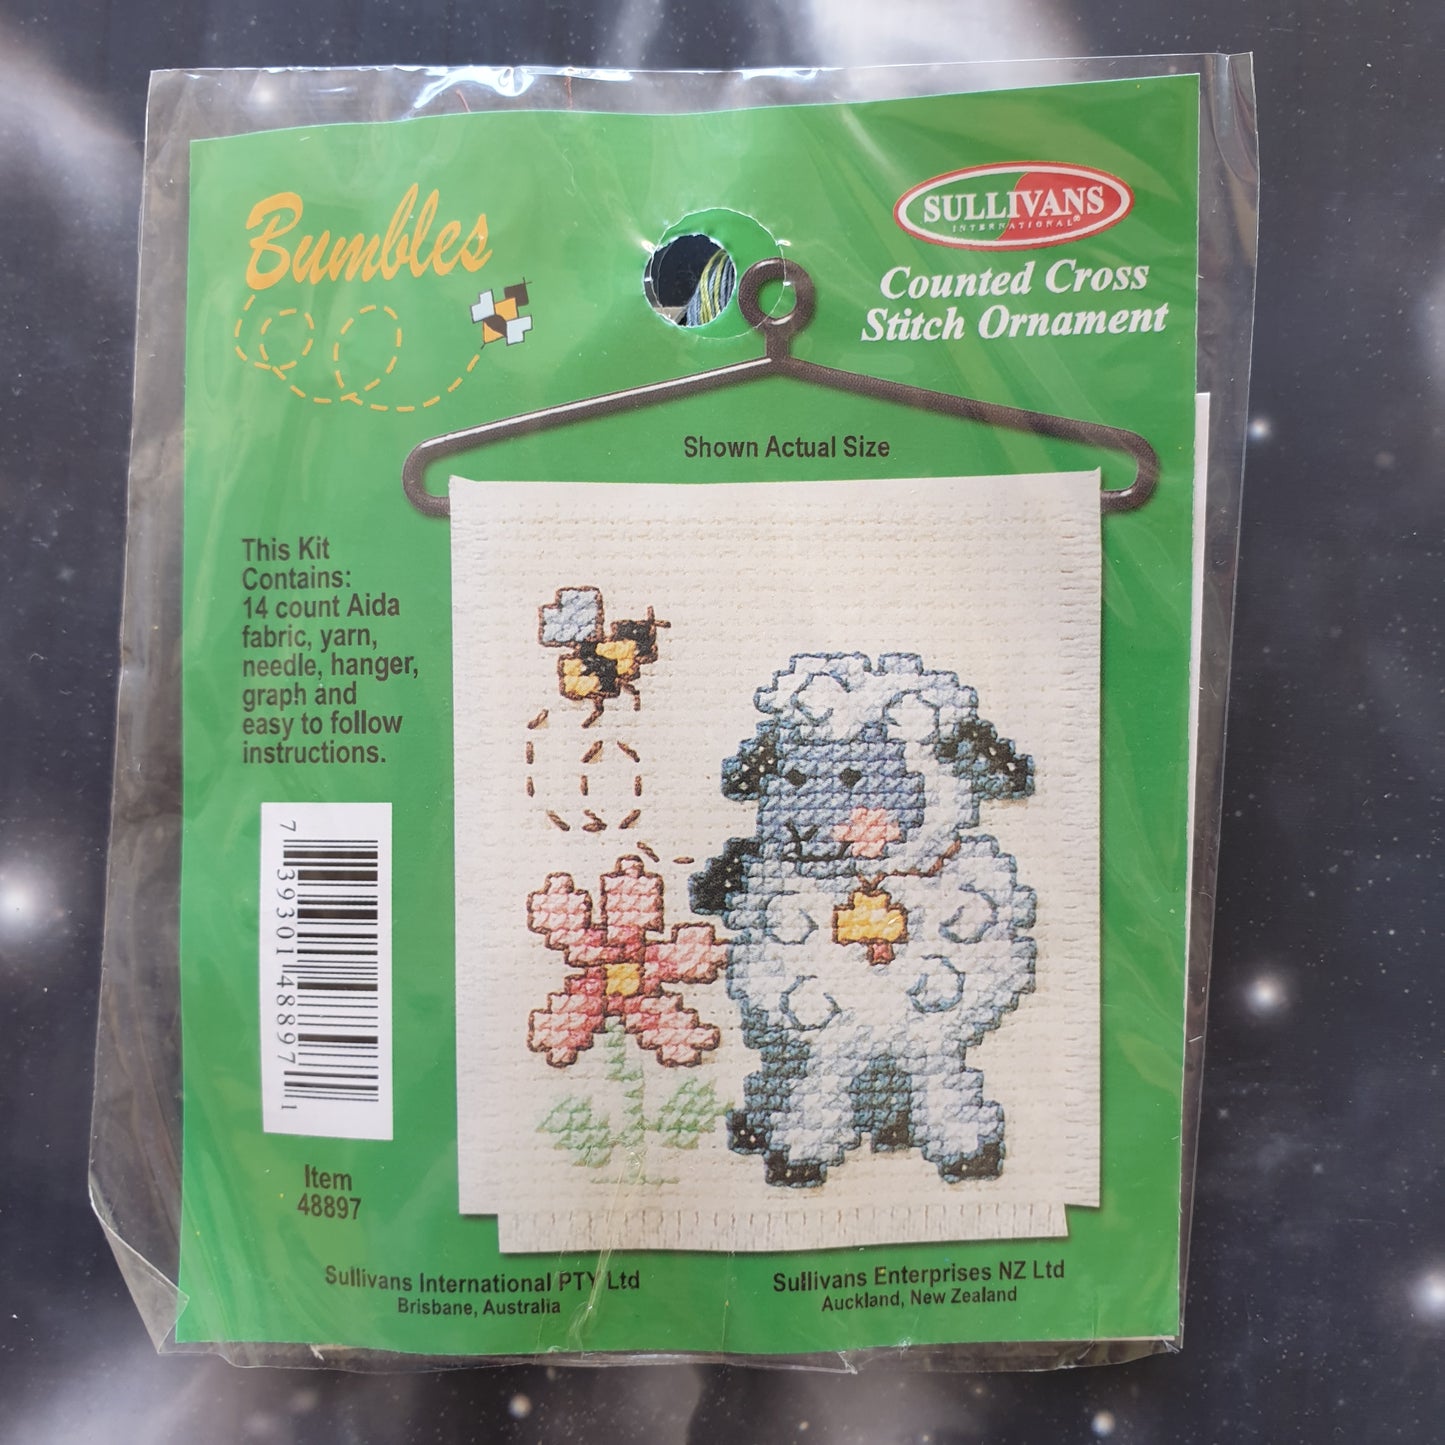 Sheep with Bee Counted Cross Stitch Ornament Kit